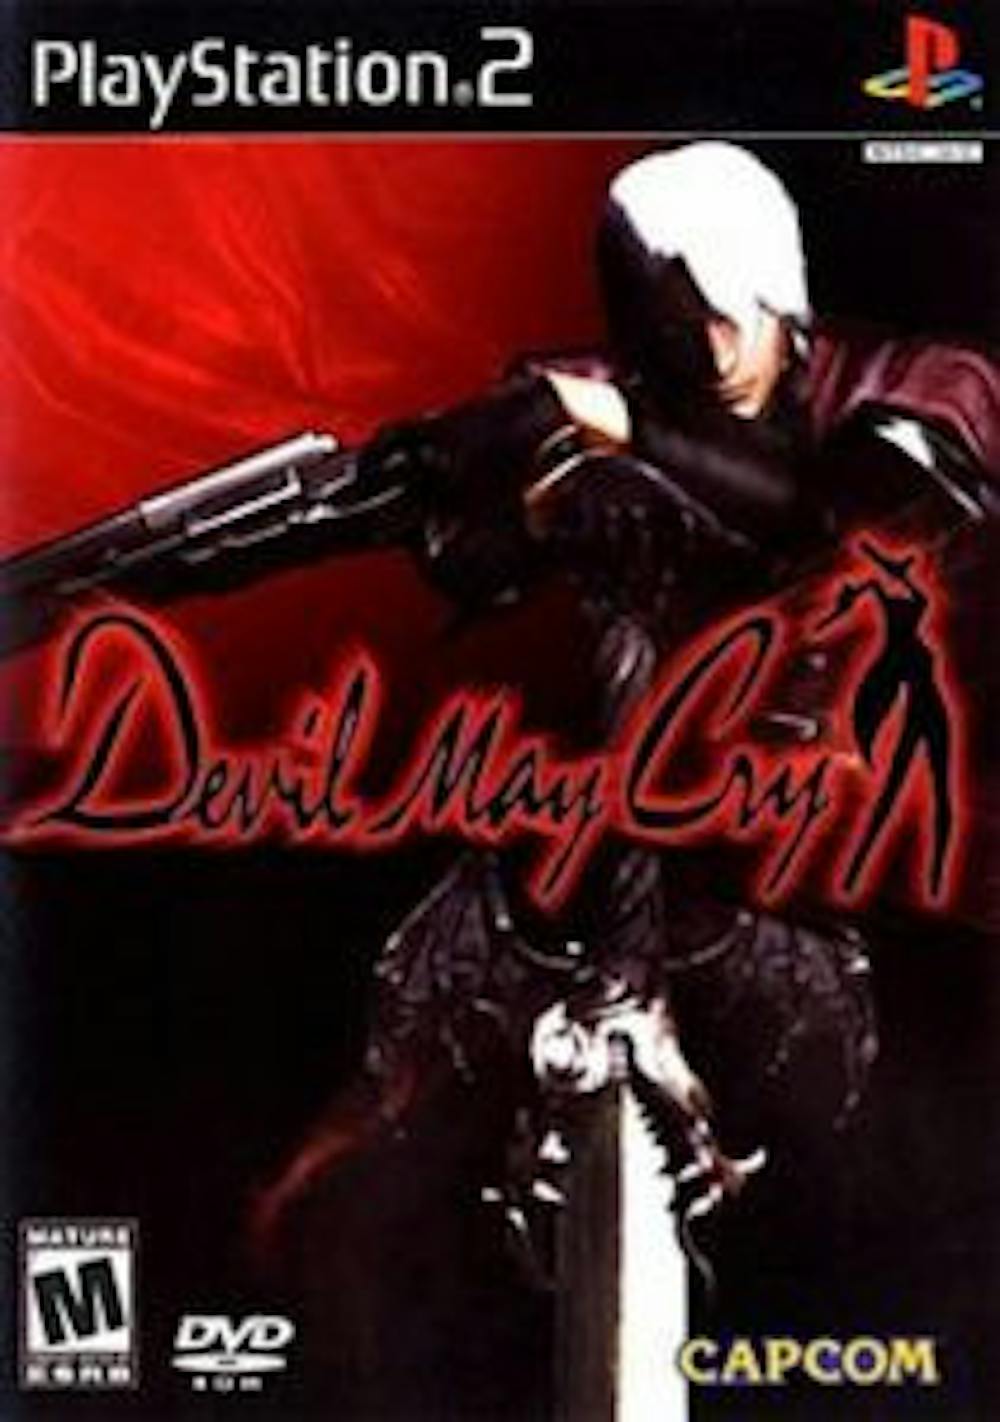 Vergil (Devil May Cry) - Wikipedia